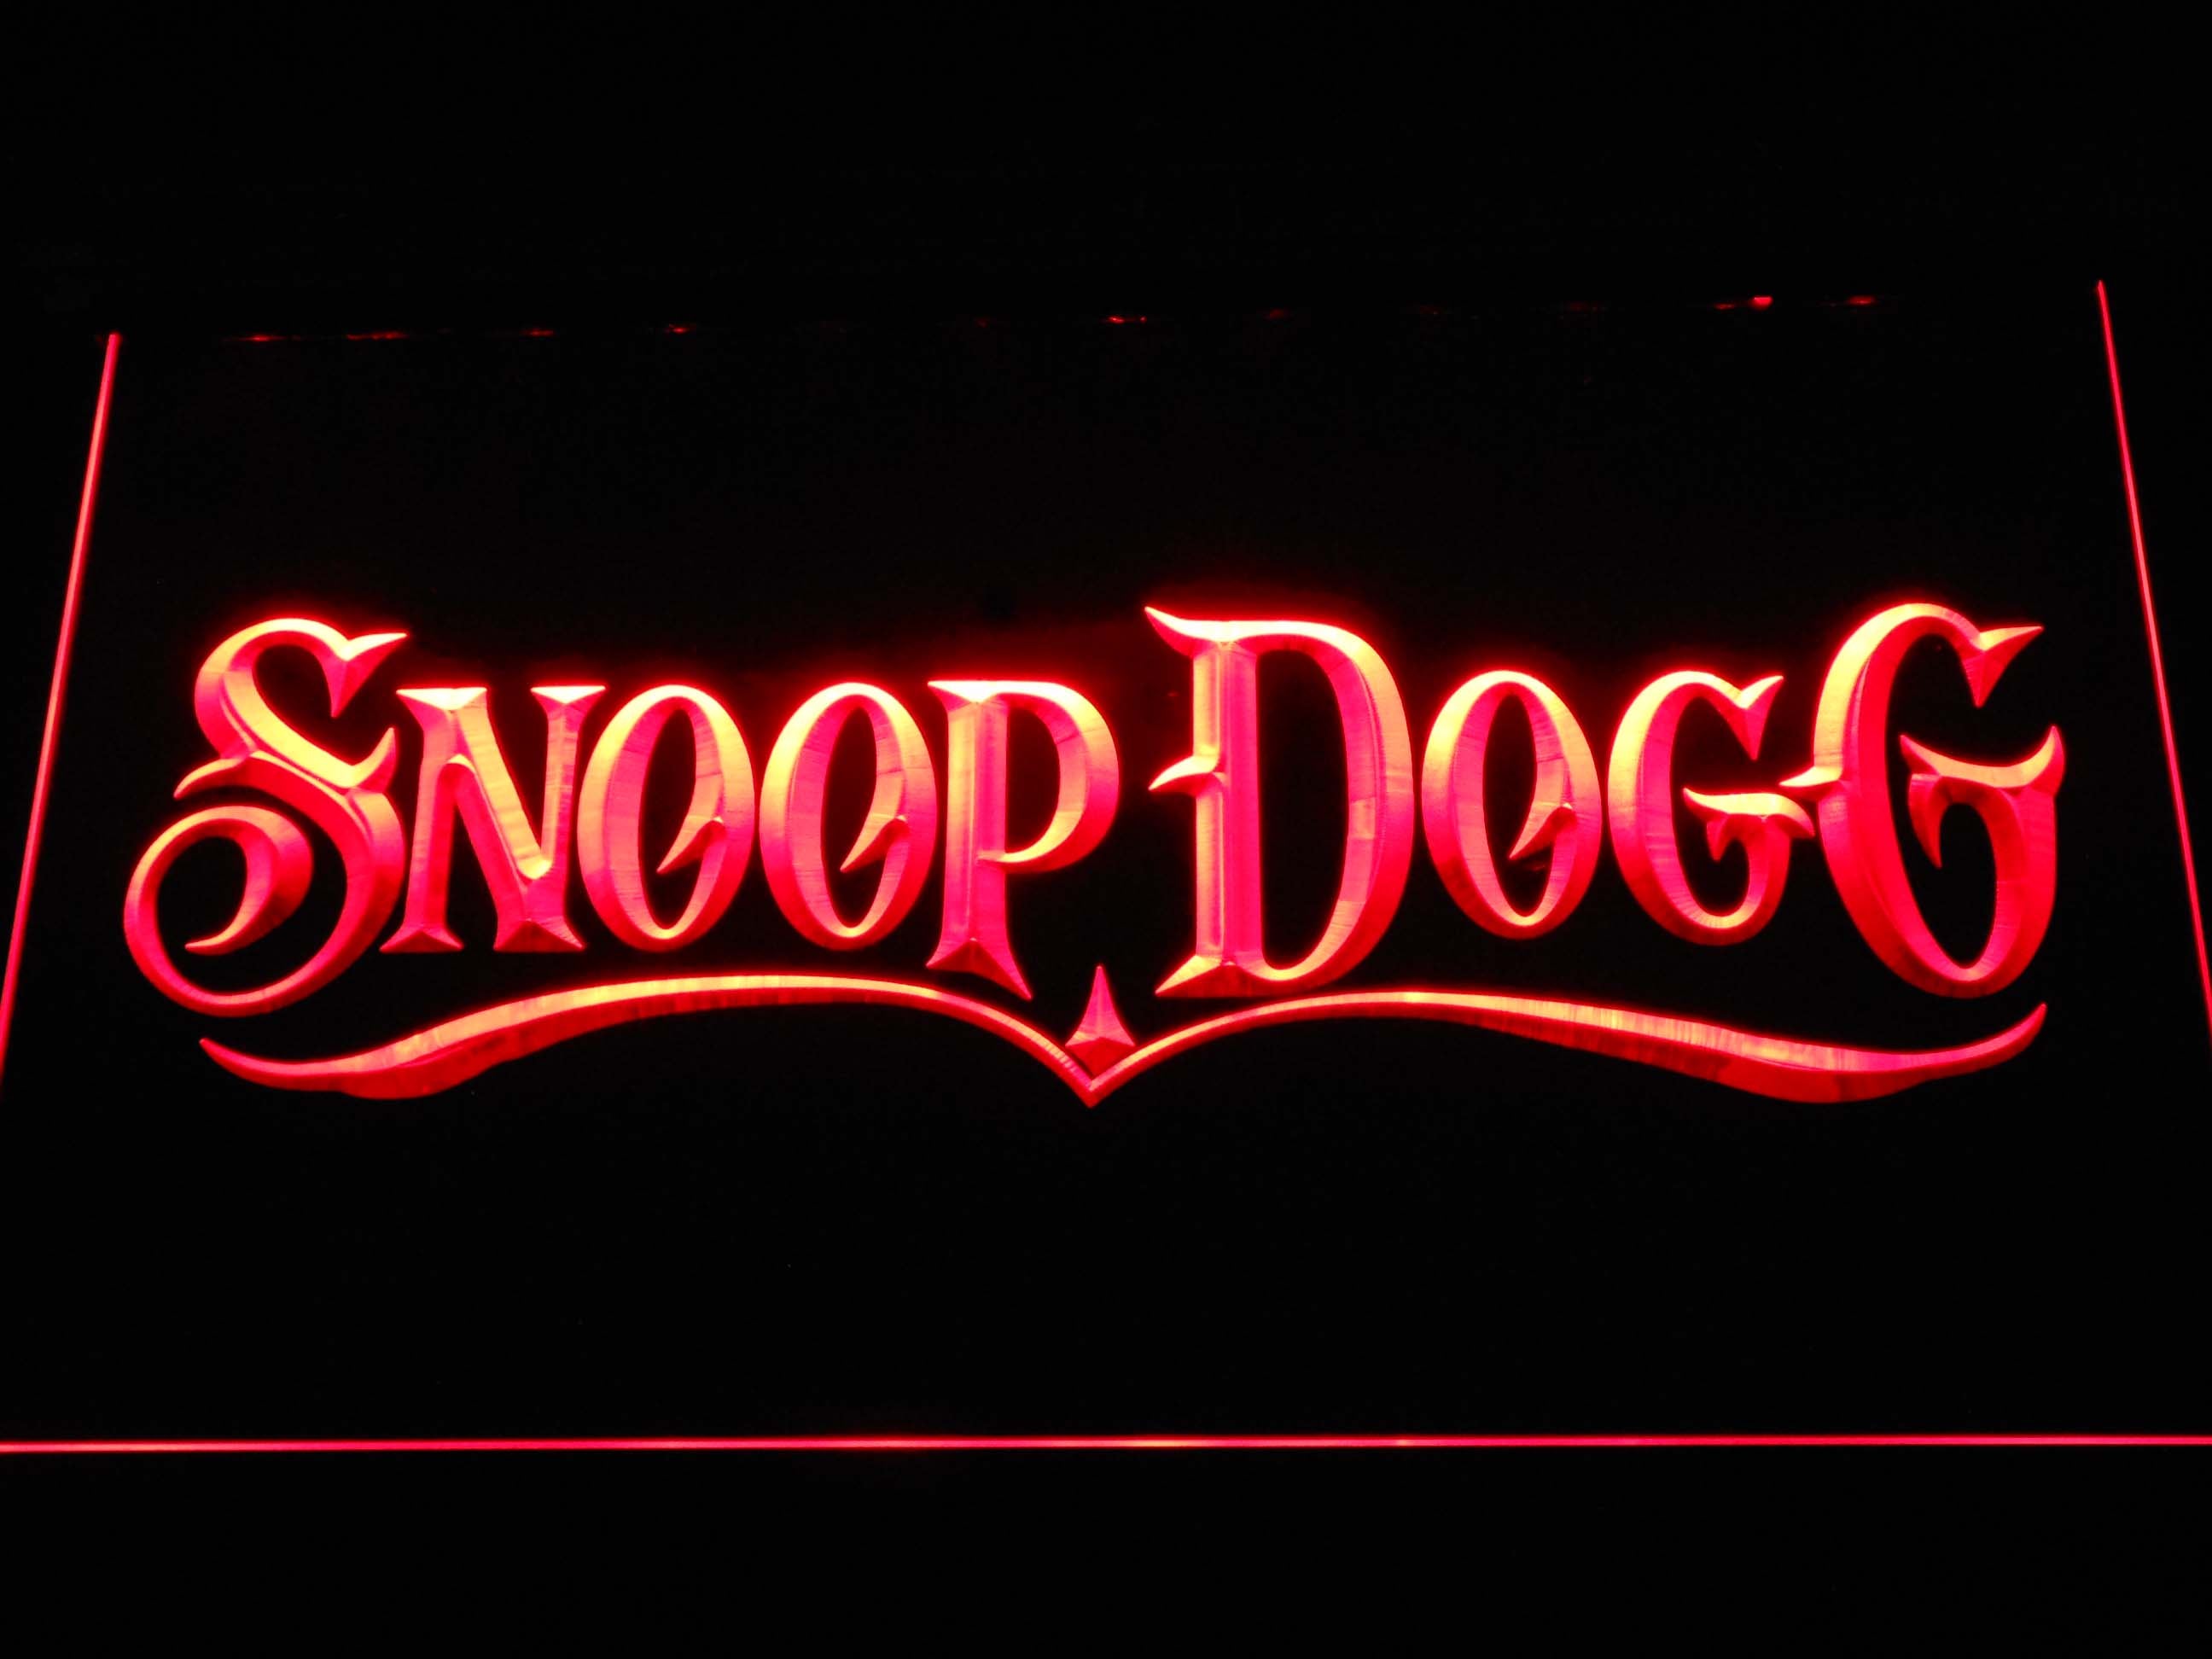 Snoop Dogg Rapper LED Neon Sign